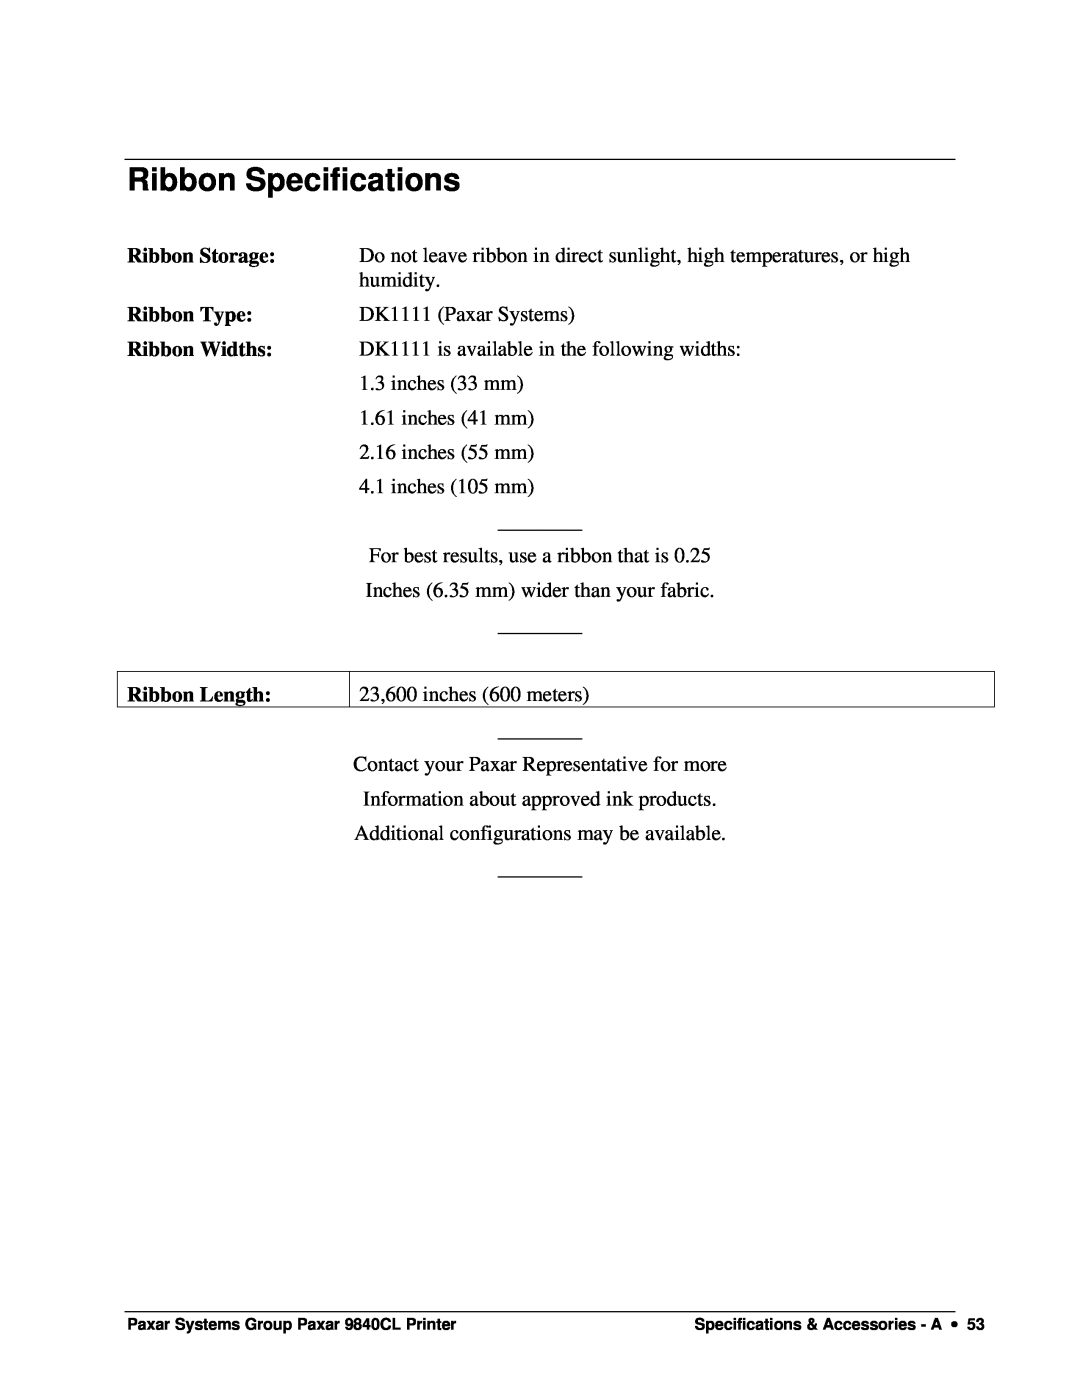 Paxar 9840CL user manual Ribbon Specifications, Ribbon Storage, Ribbon Type, Ribbon Widths, Ribbon Length 